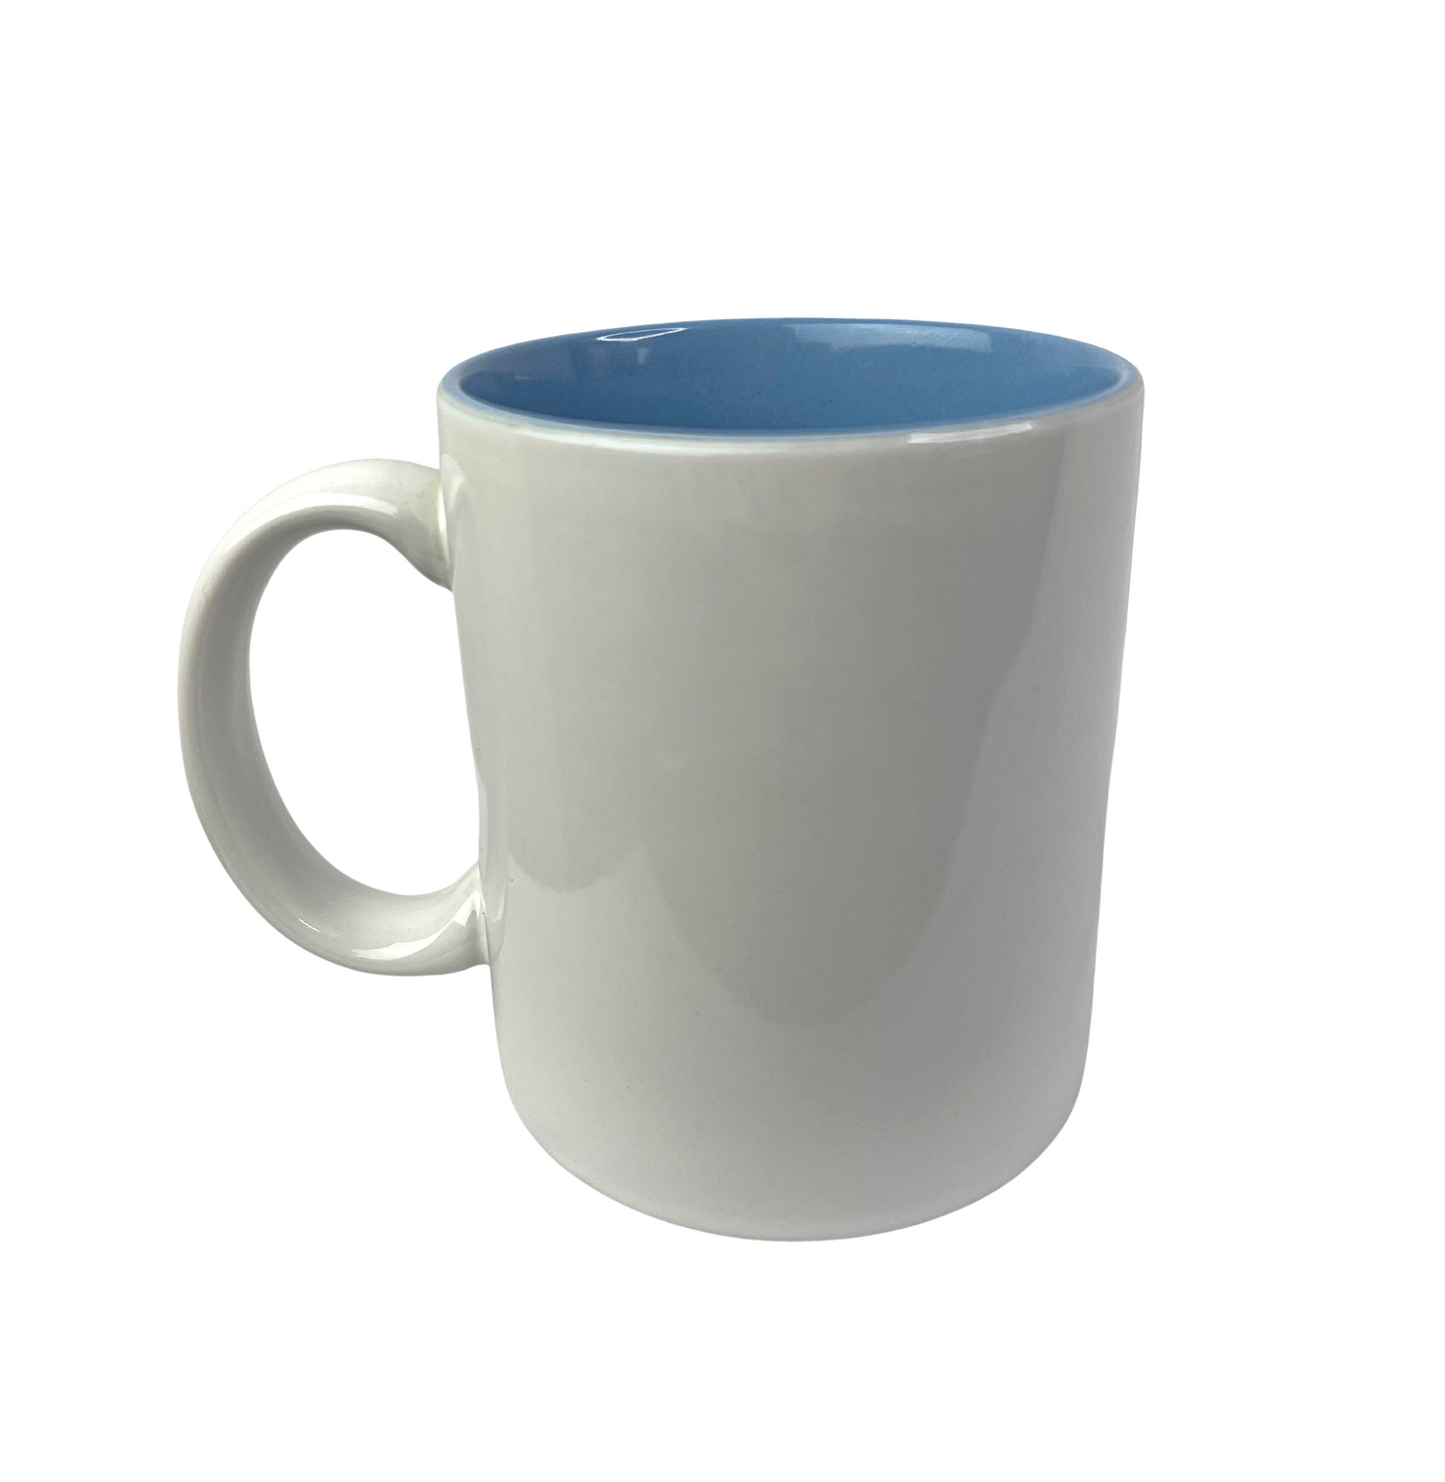 80’s Funny …And How is Your Day? Coffee Mug